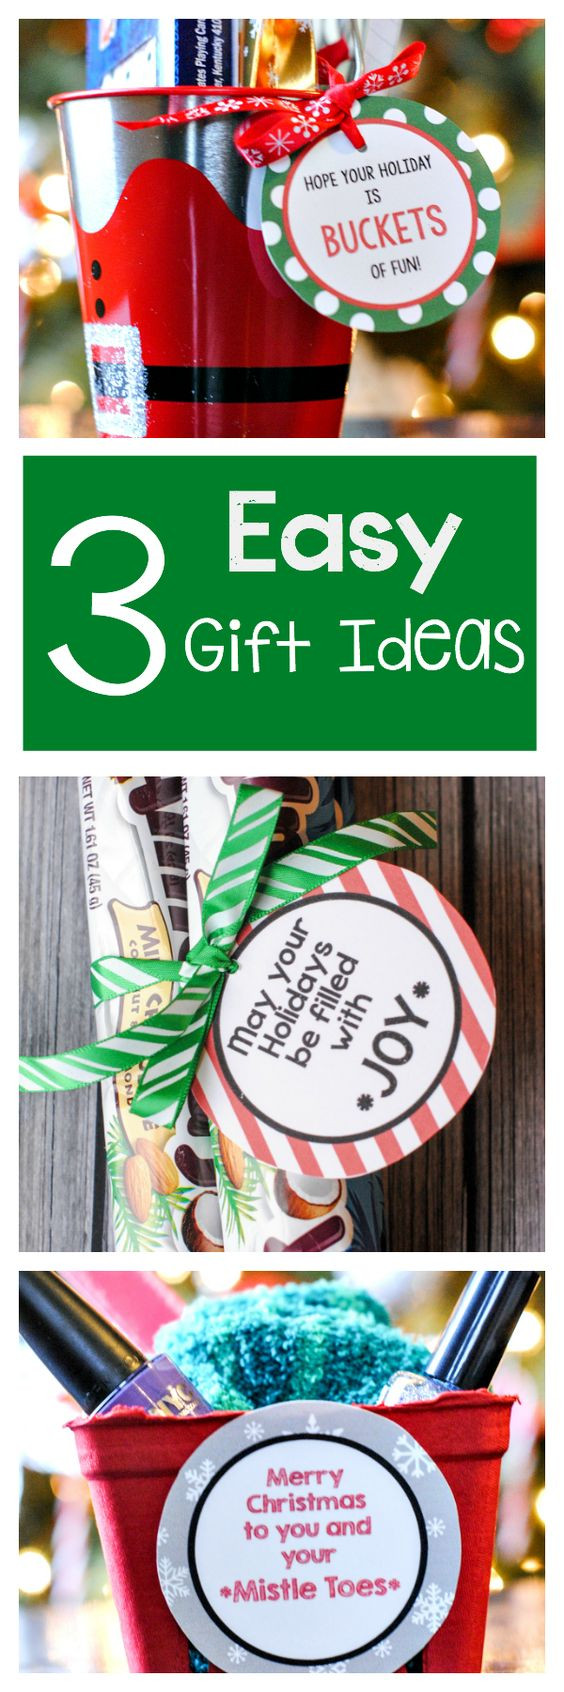 Little Christmas Gift Ideas
 The BEST FREE Christmas Printables – Gift Tags Holiday